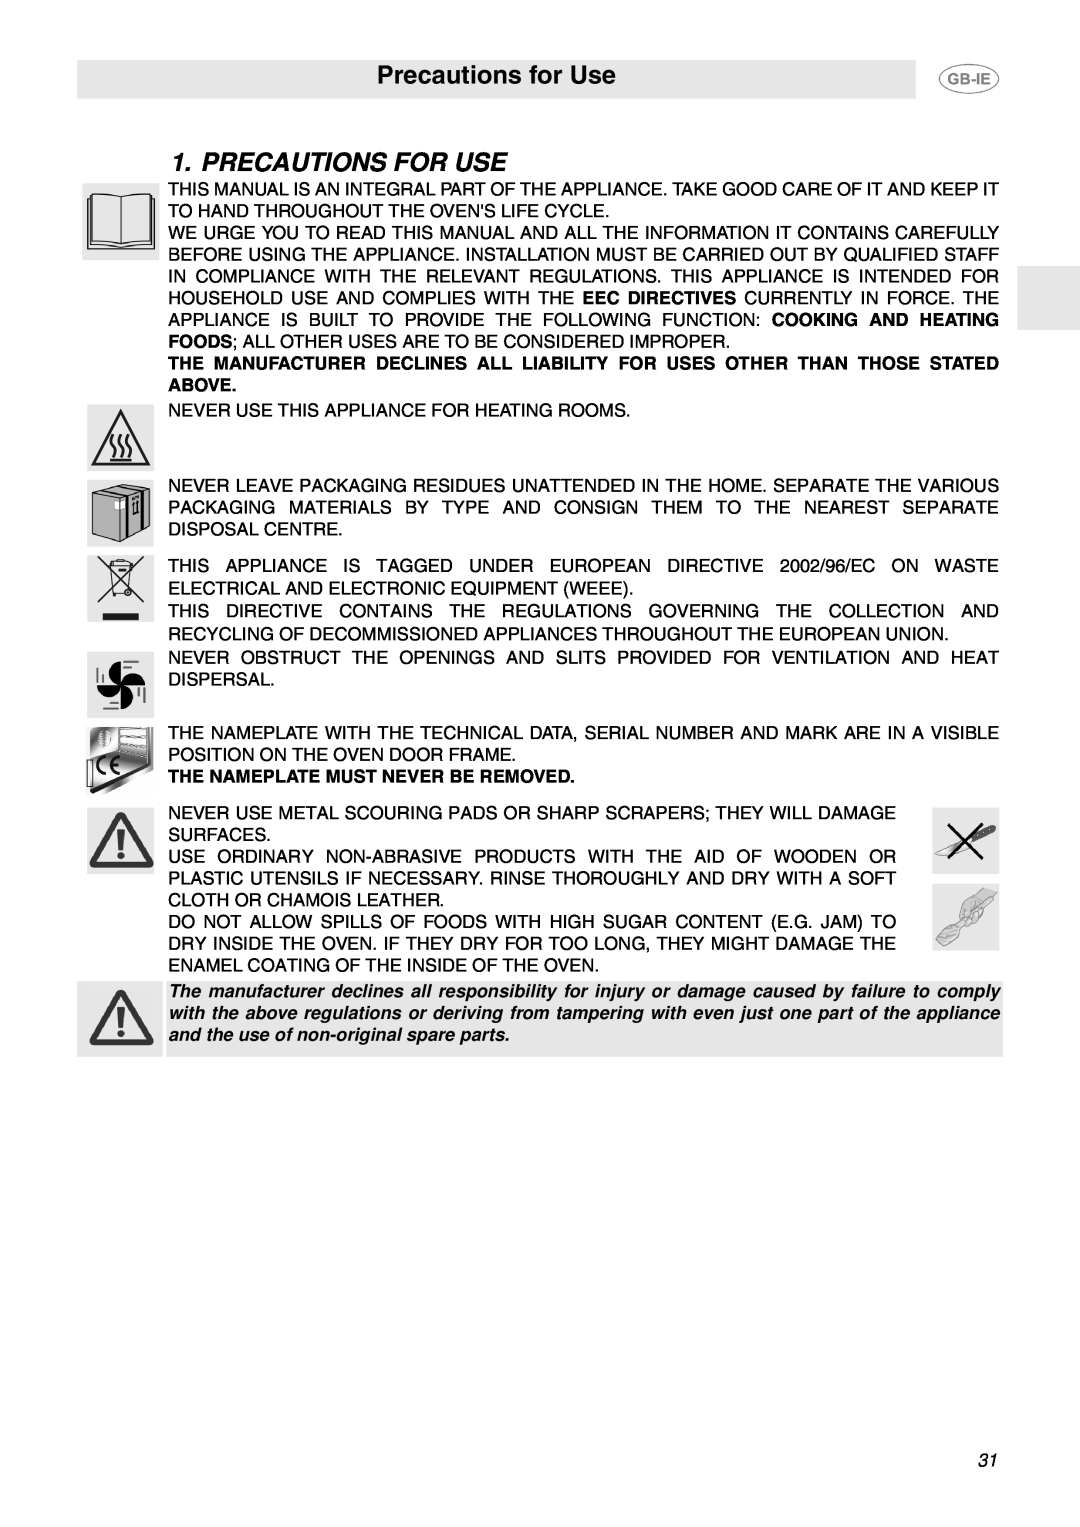 Smeg FP130X, FP130N, FP130B manual Precautions for Use, Precautions For Use, The Nameplate Must Never Be Removed 